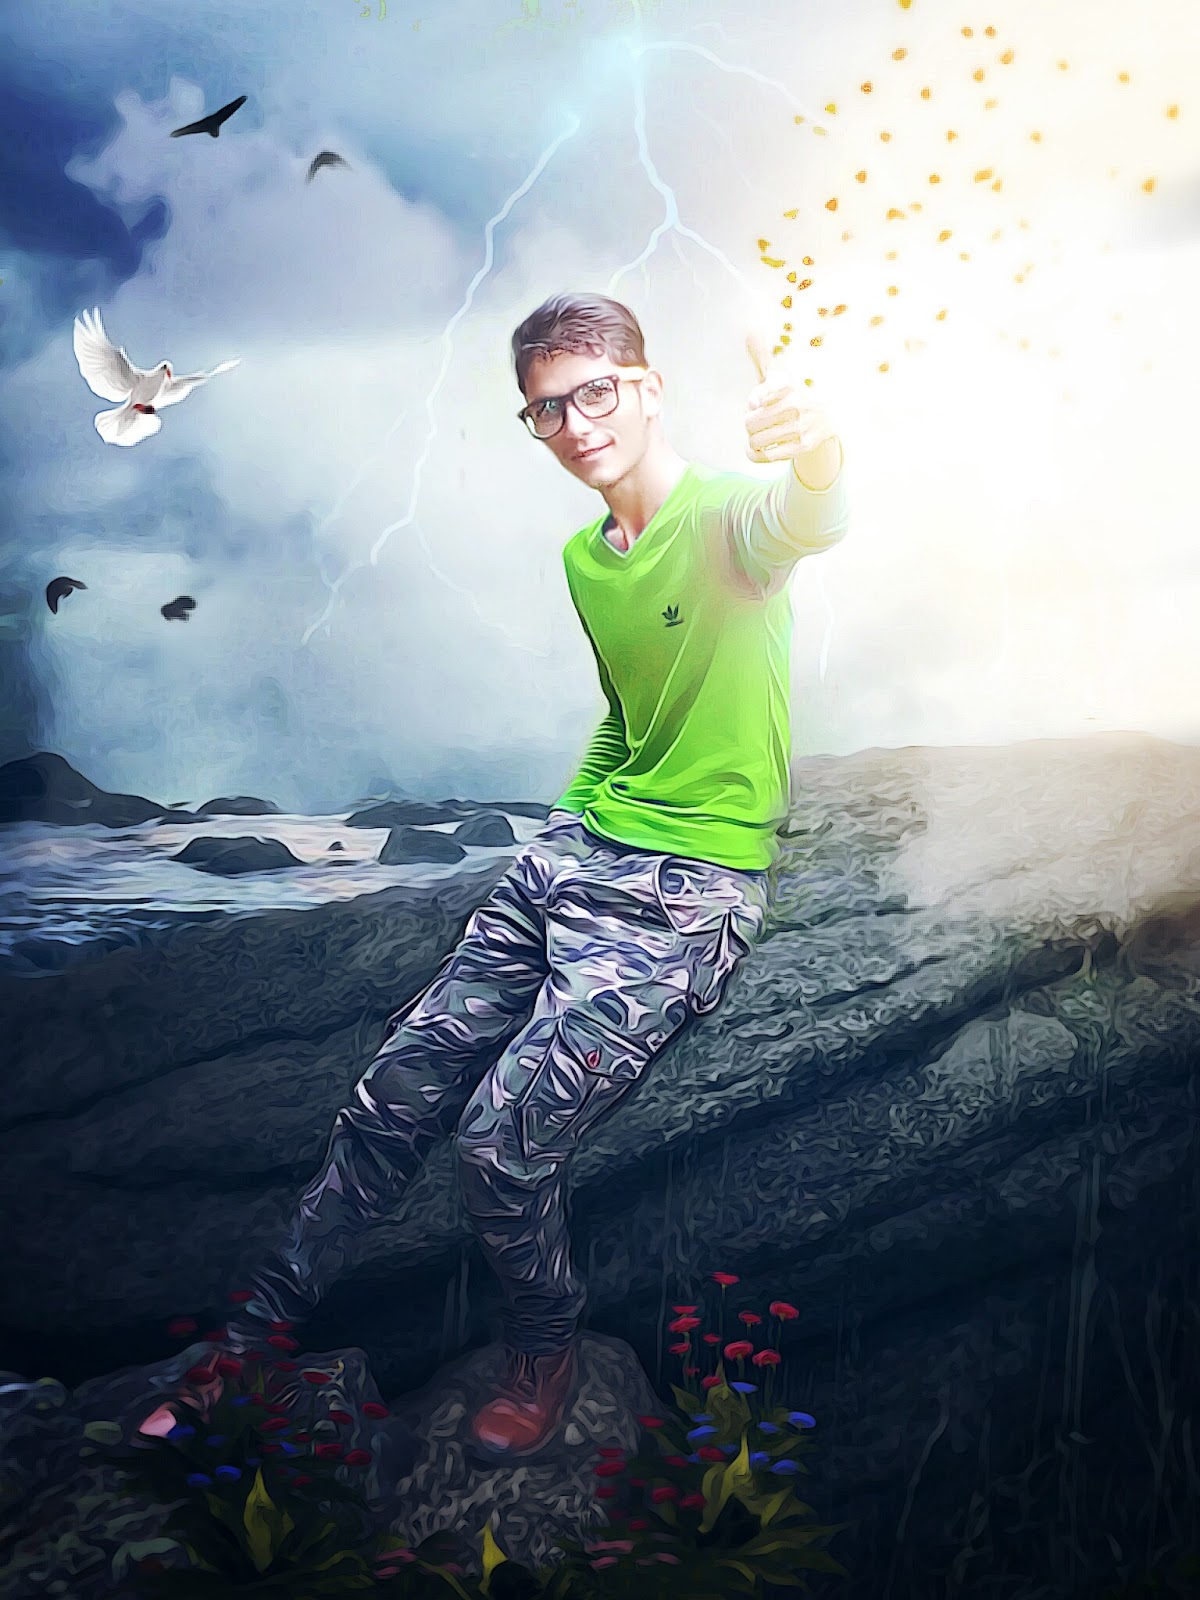 Best Editing  Effects Real Image Editing  by PicsArt  Kamal 